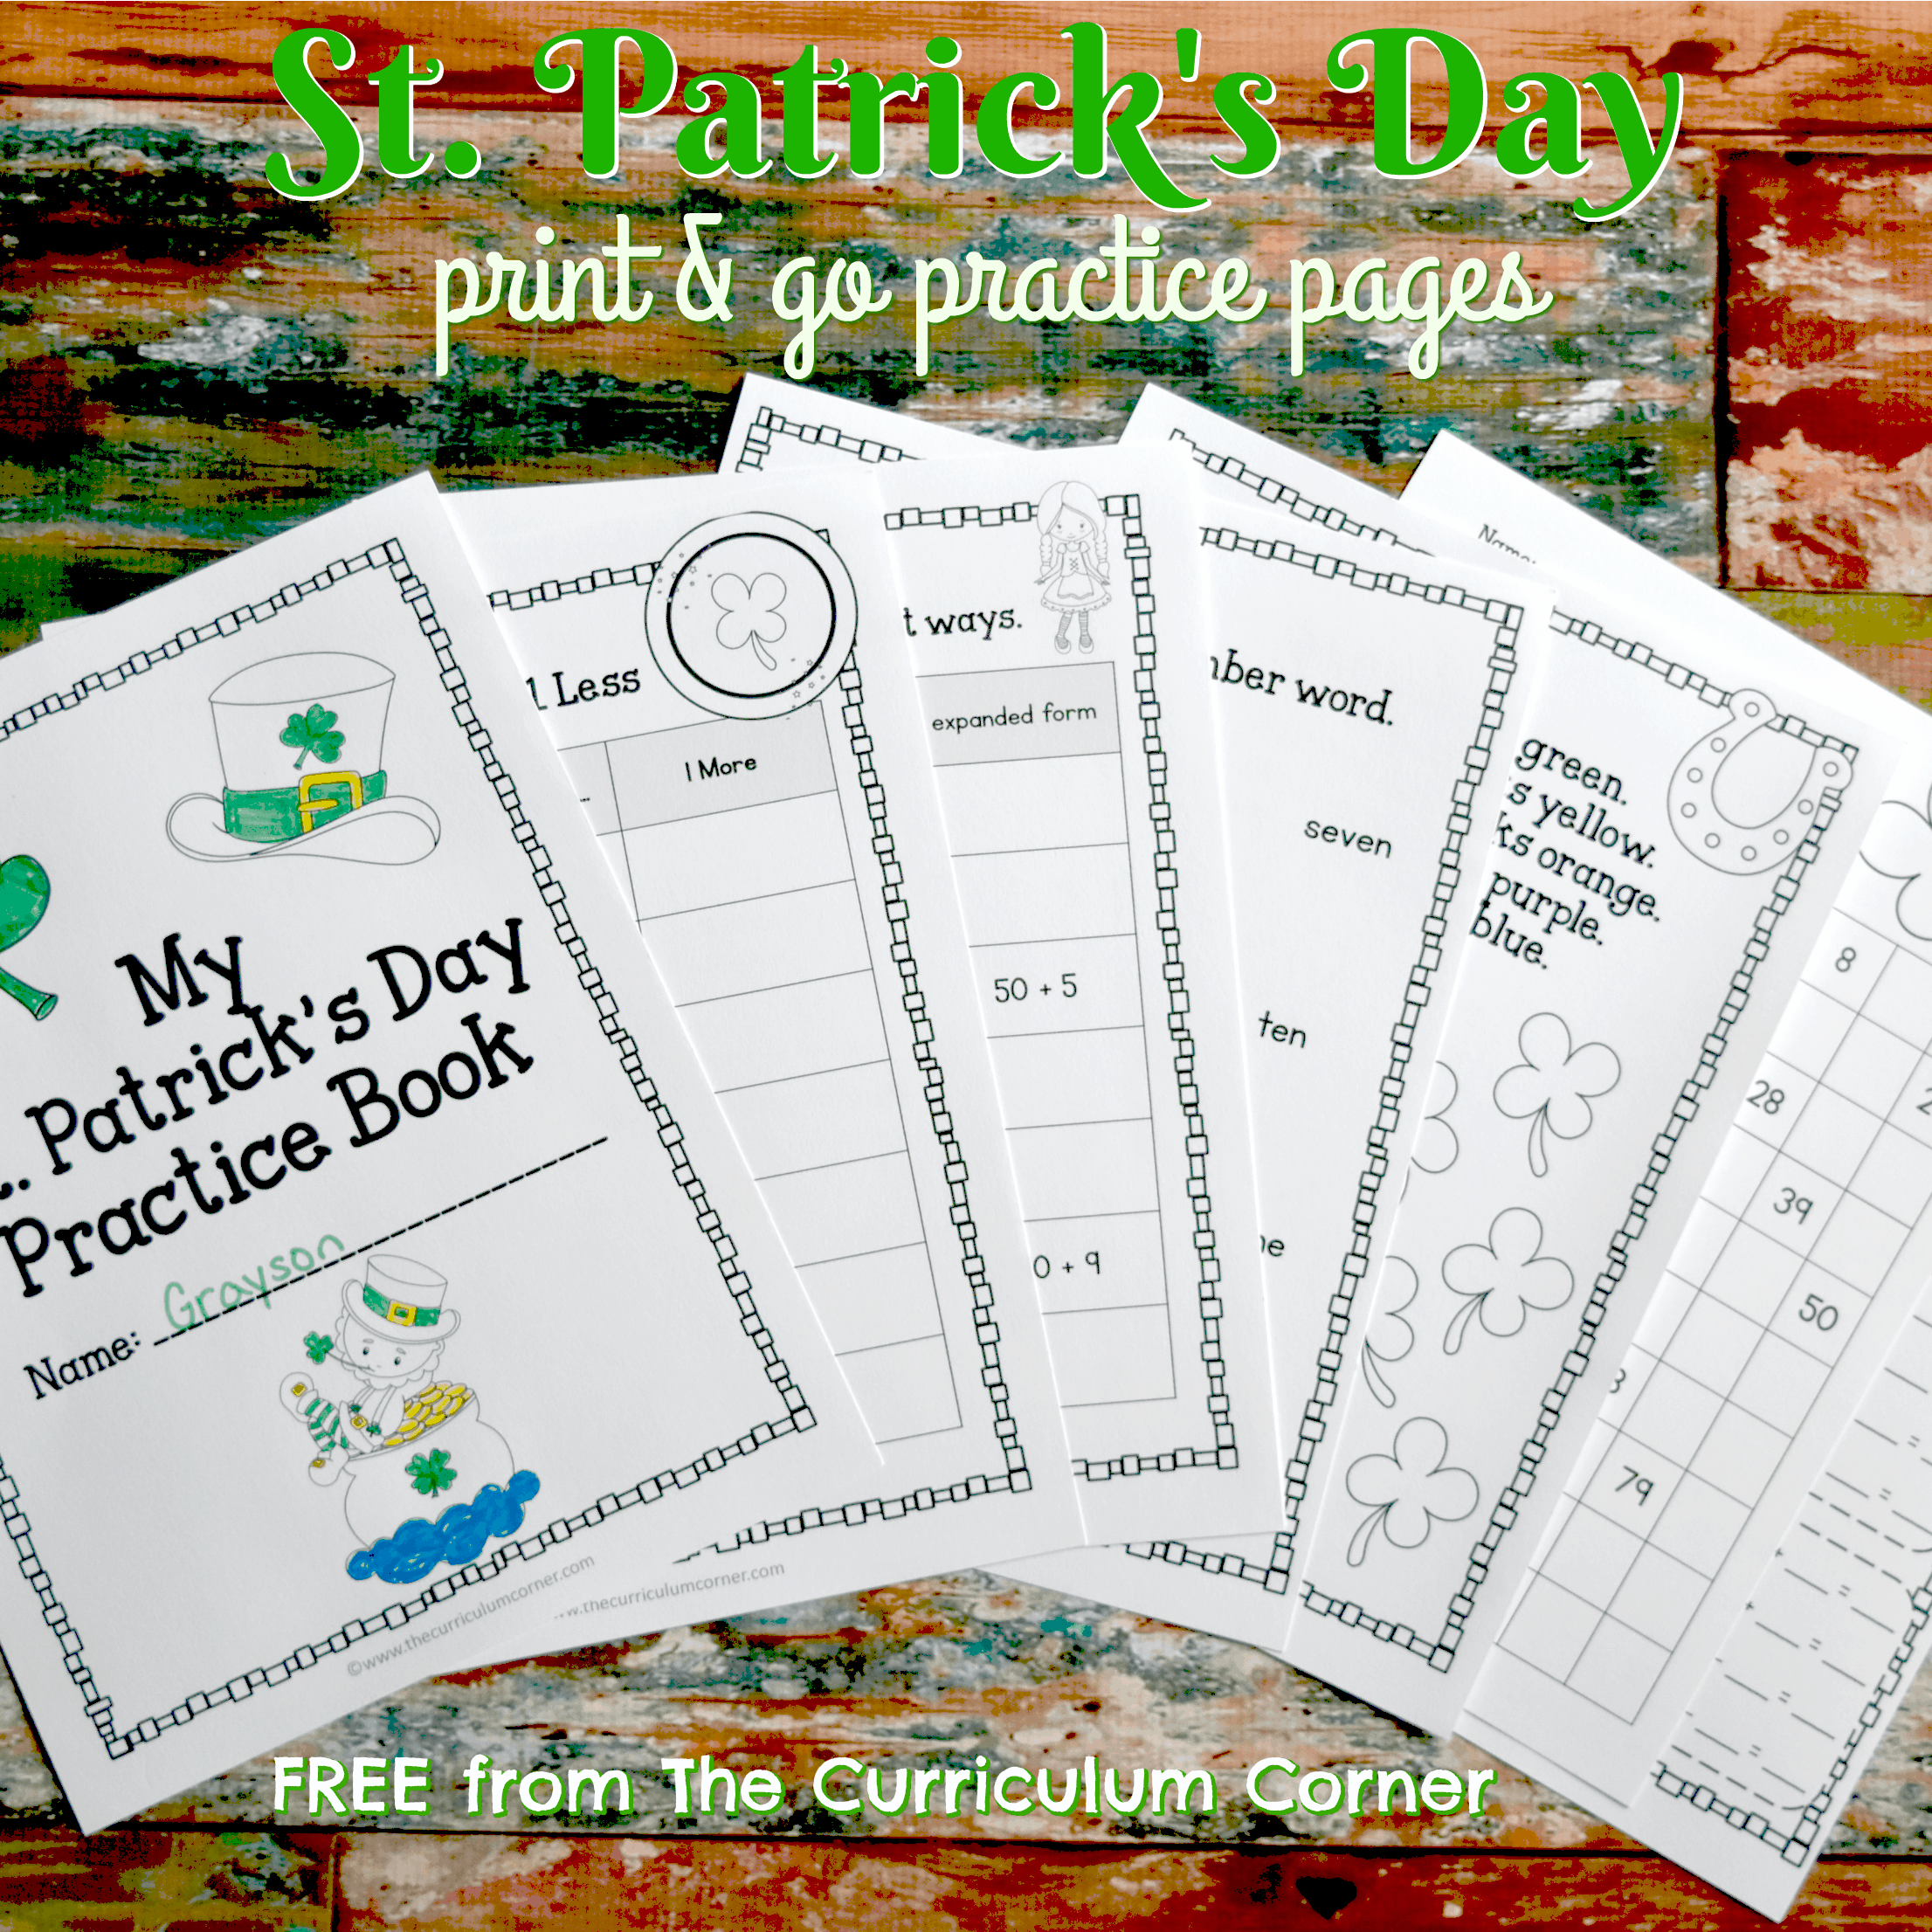 FREE St. Patrick's Day Print & Go Practice Pages from The Curriculum Corner | computation, number sense, word work, writing & more!